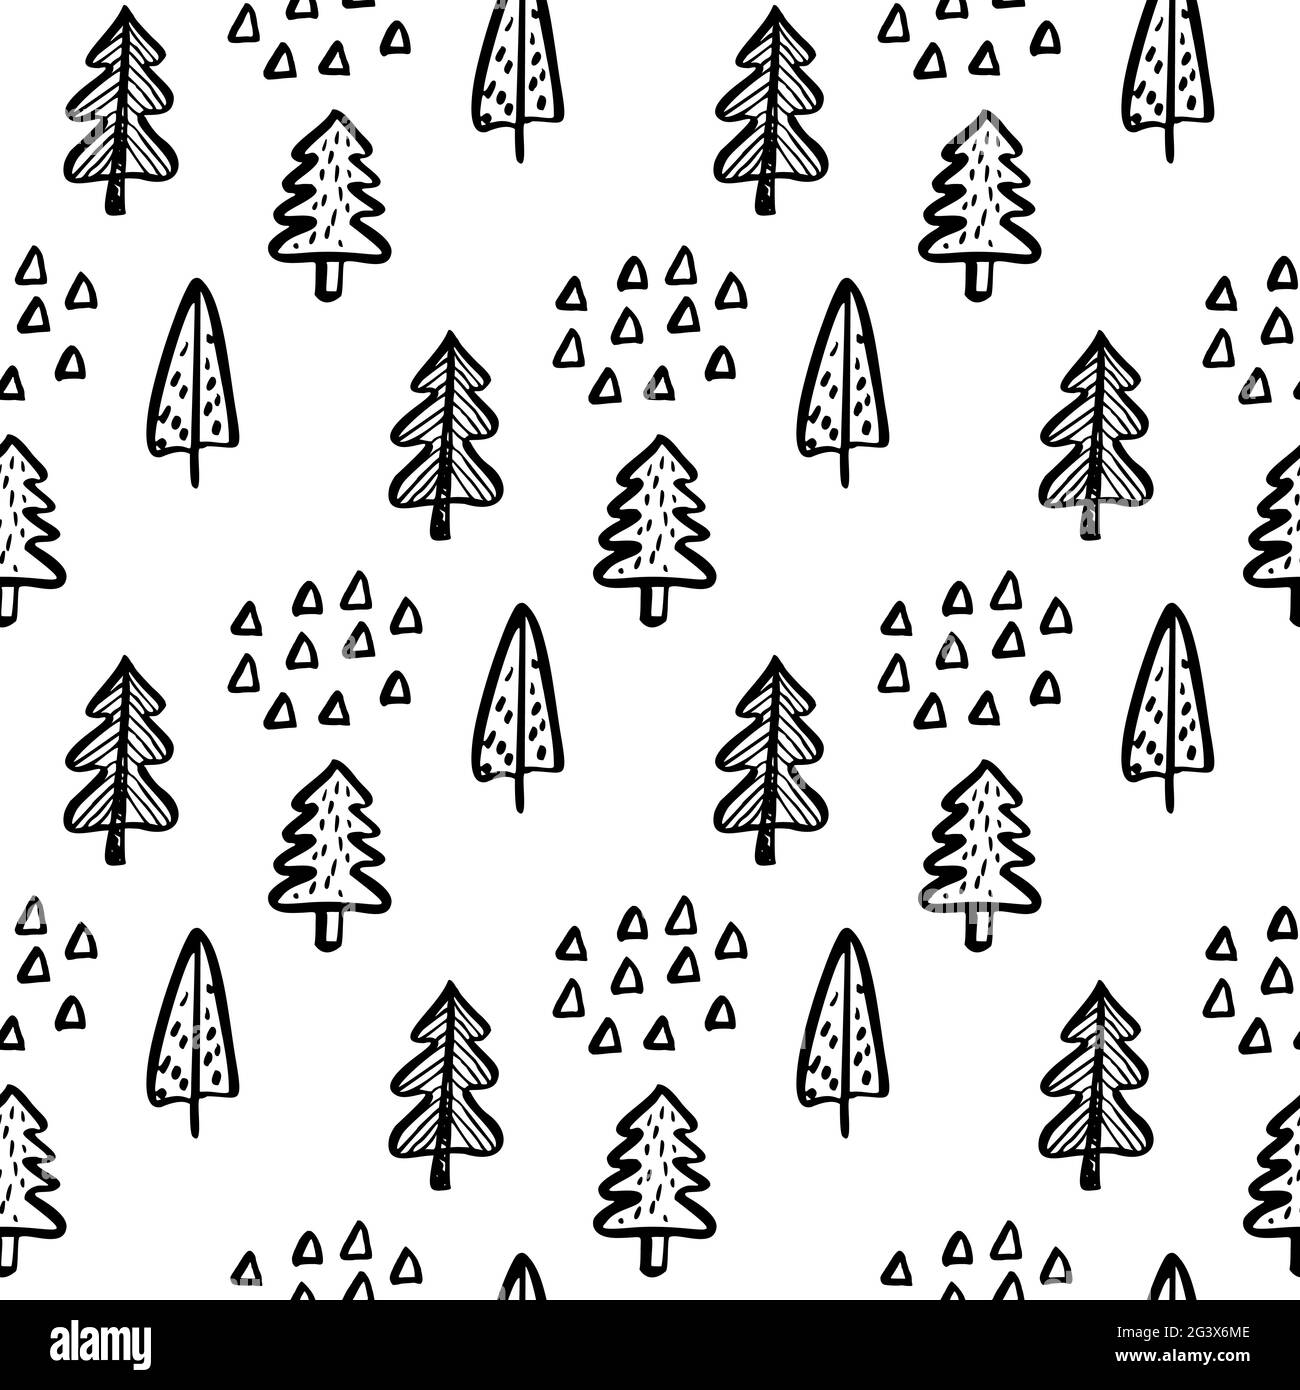 Christmas wallpaper Black and White Stock Photos & Images - Alamy